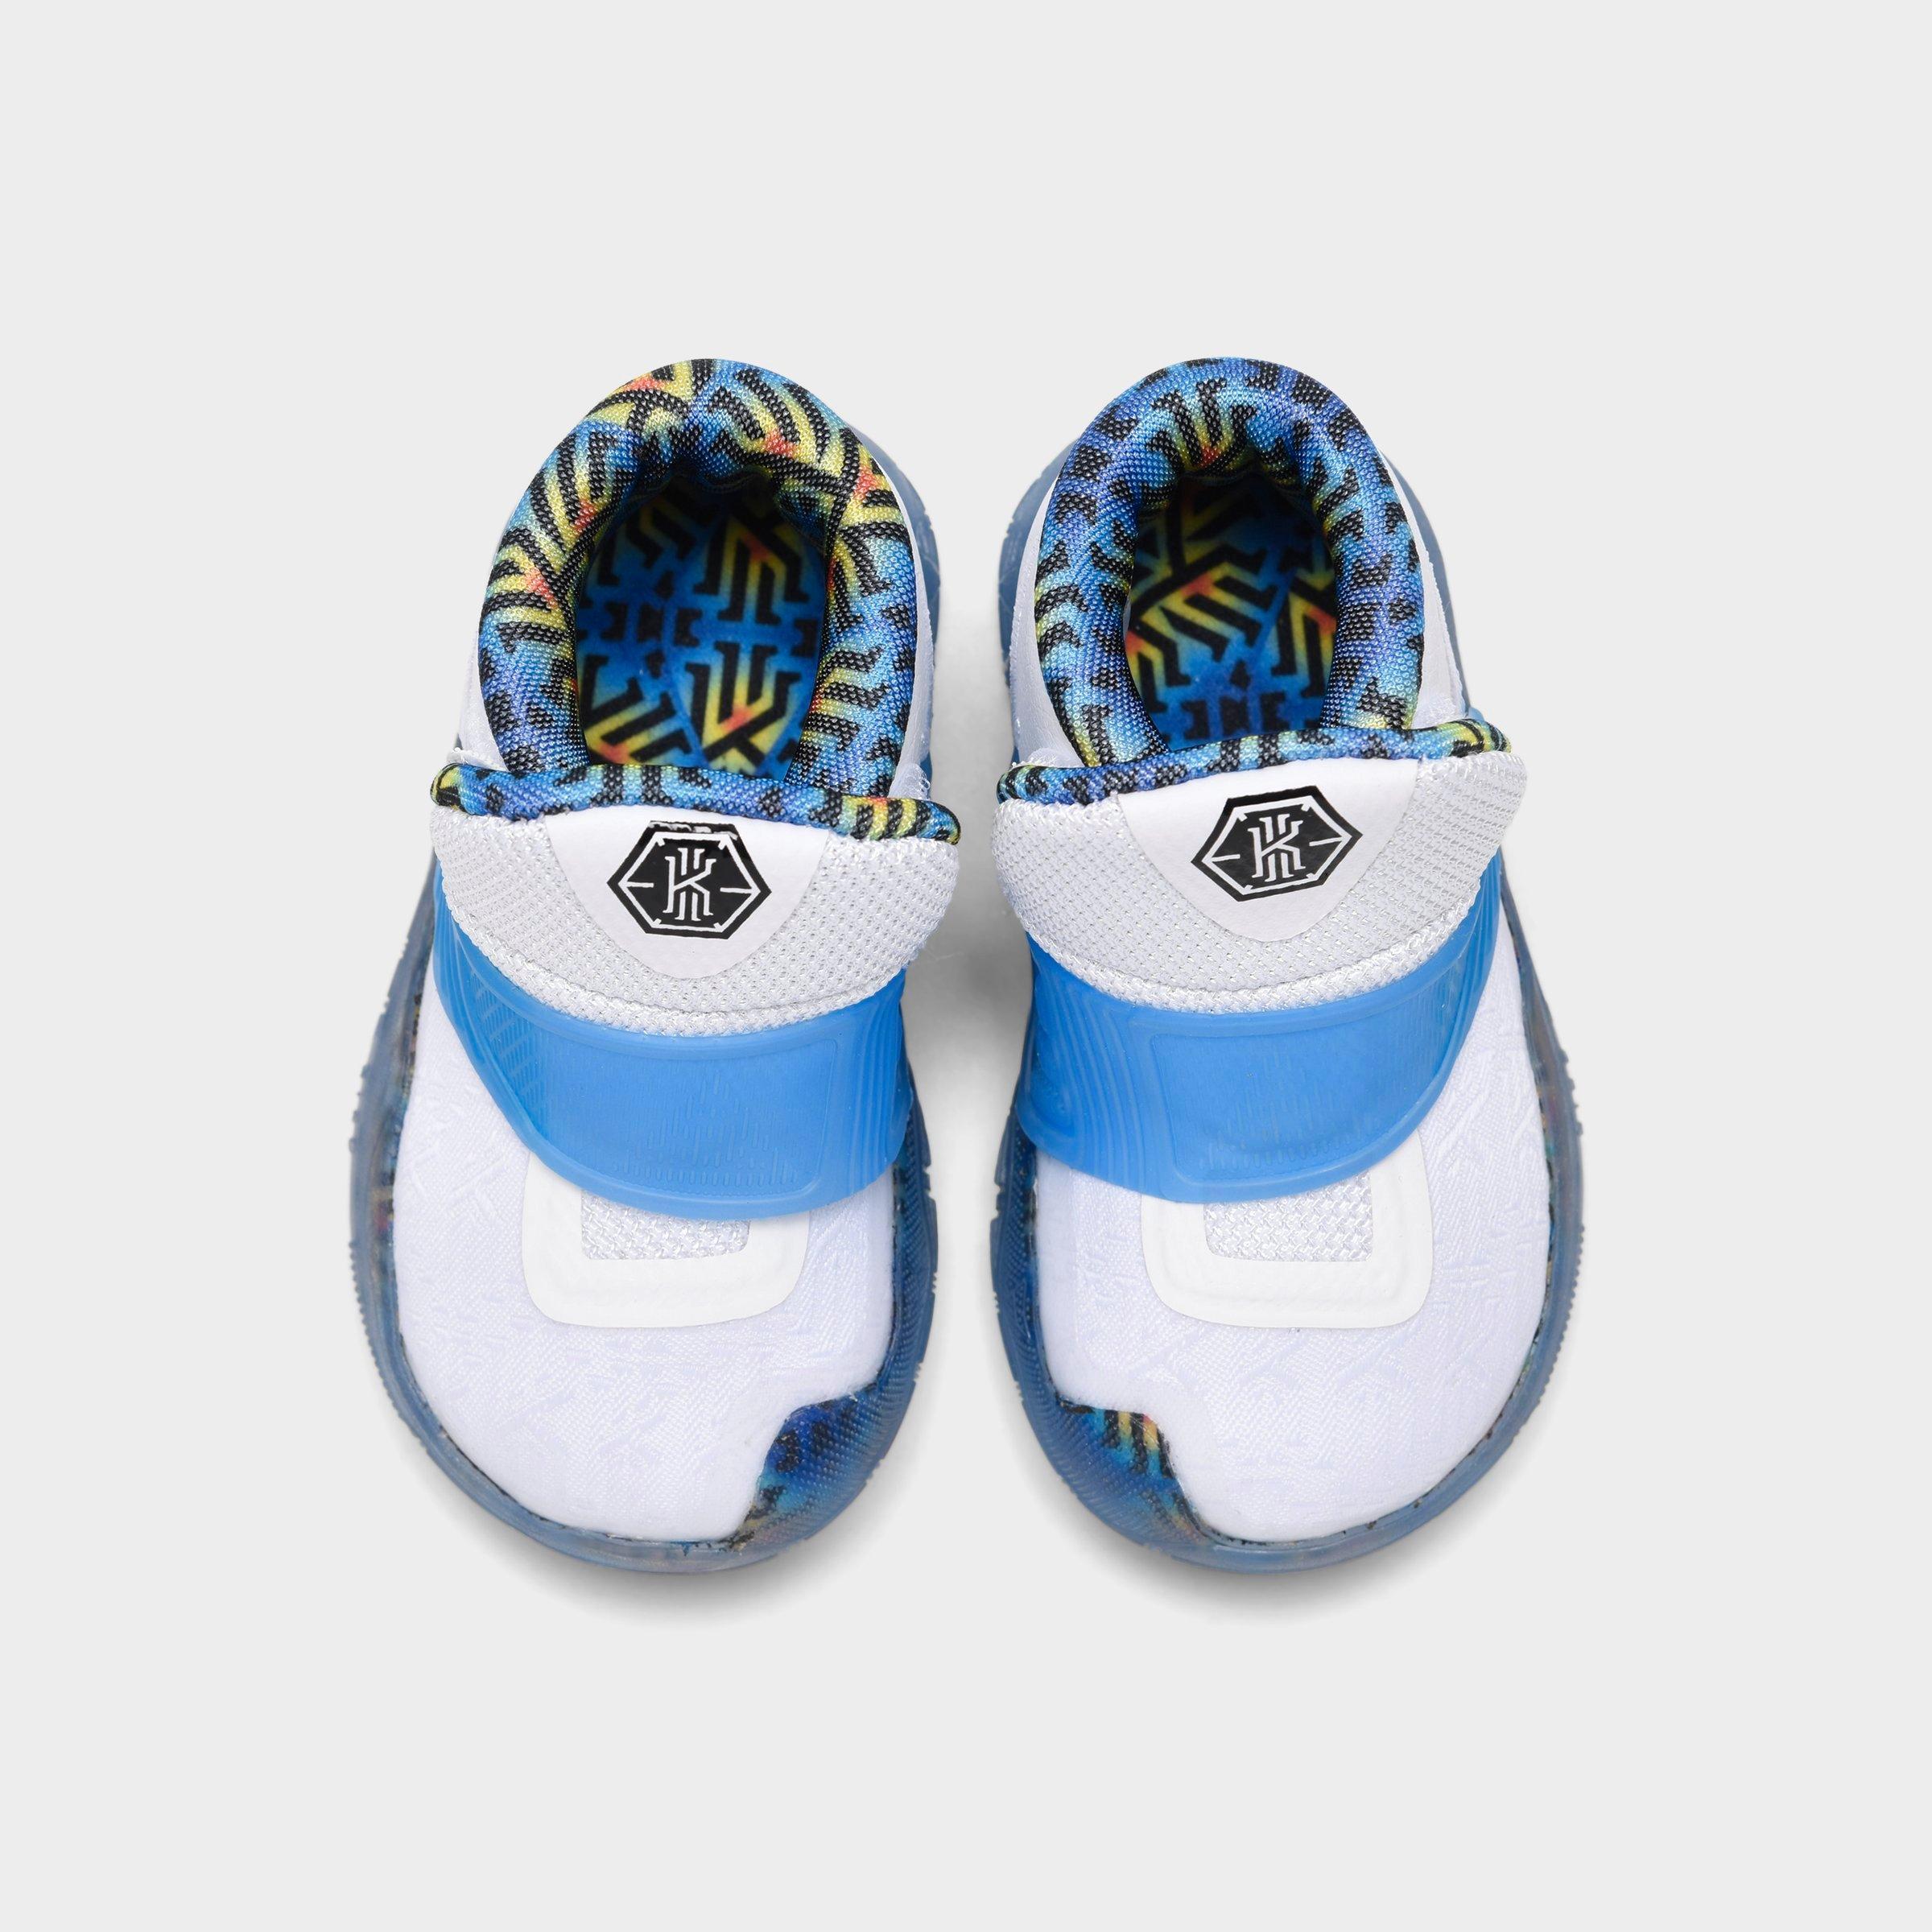 nike kyrie 6 spongebob For For Men. Casual Shoes. Sports